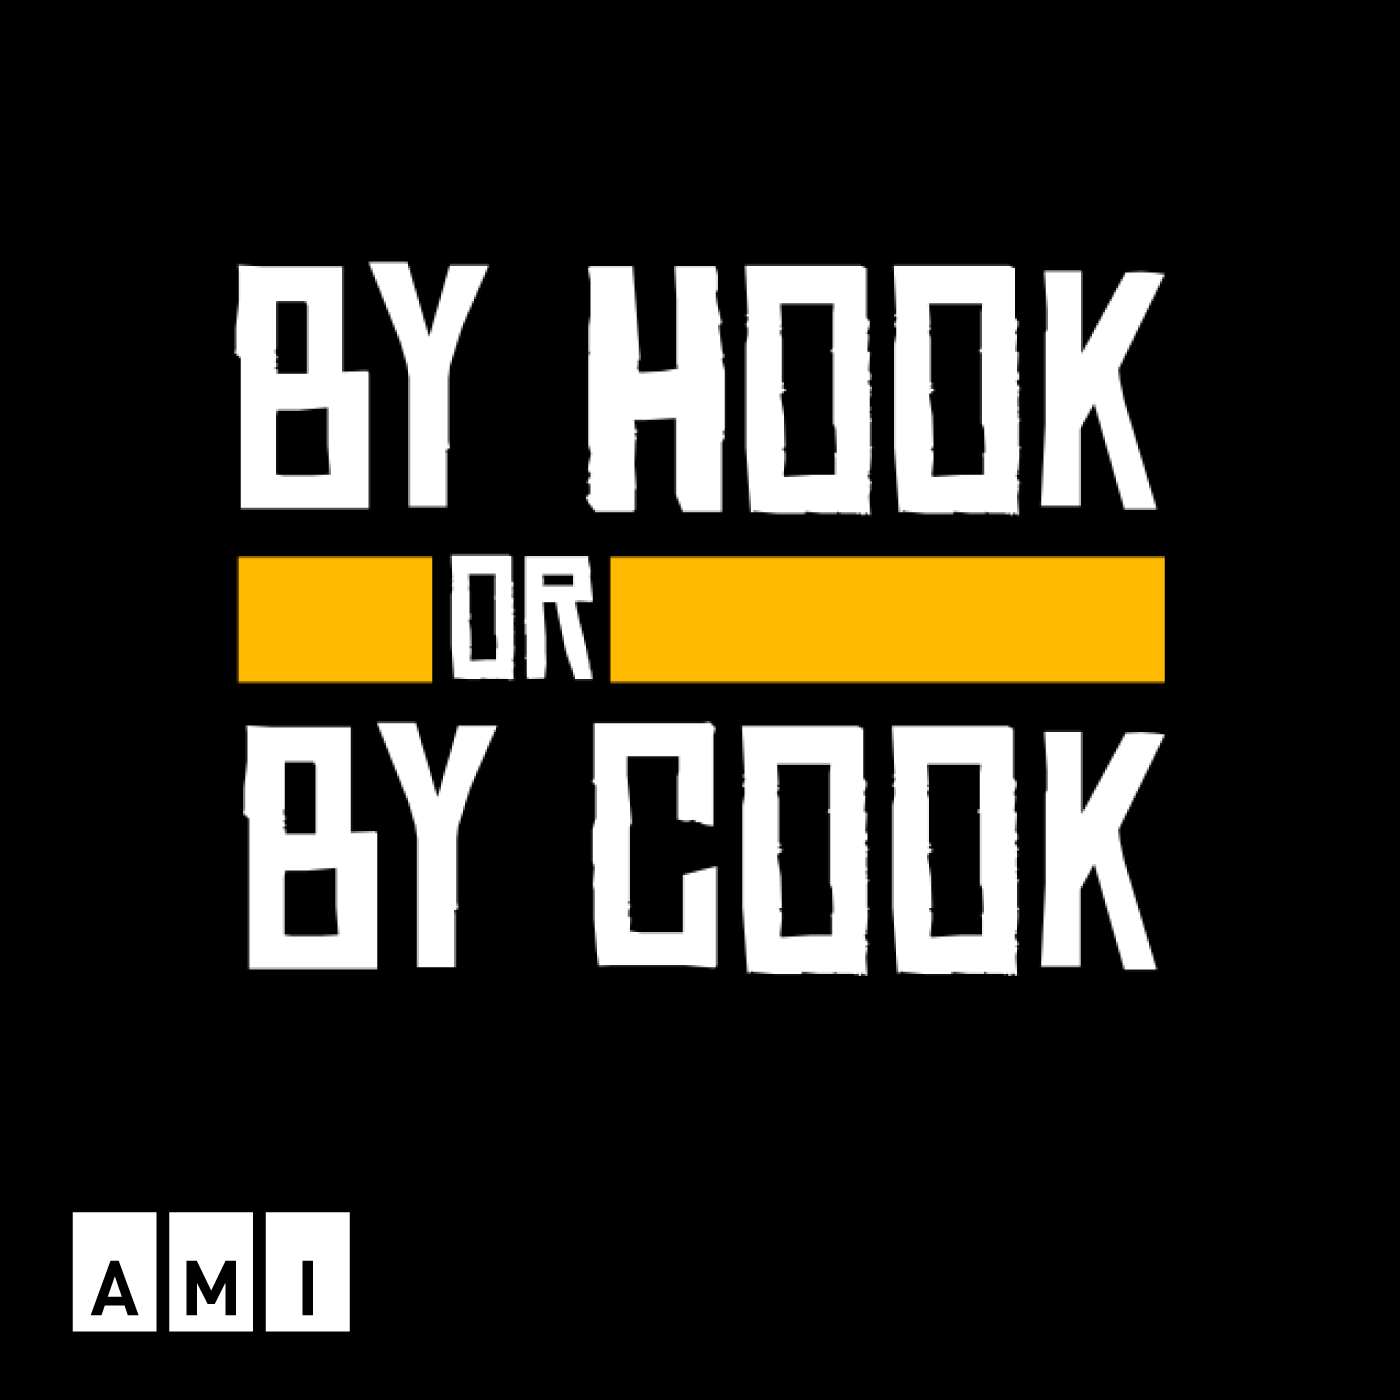 The By Hook or By Cook logo